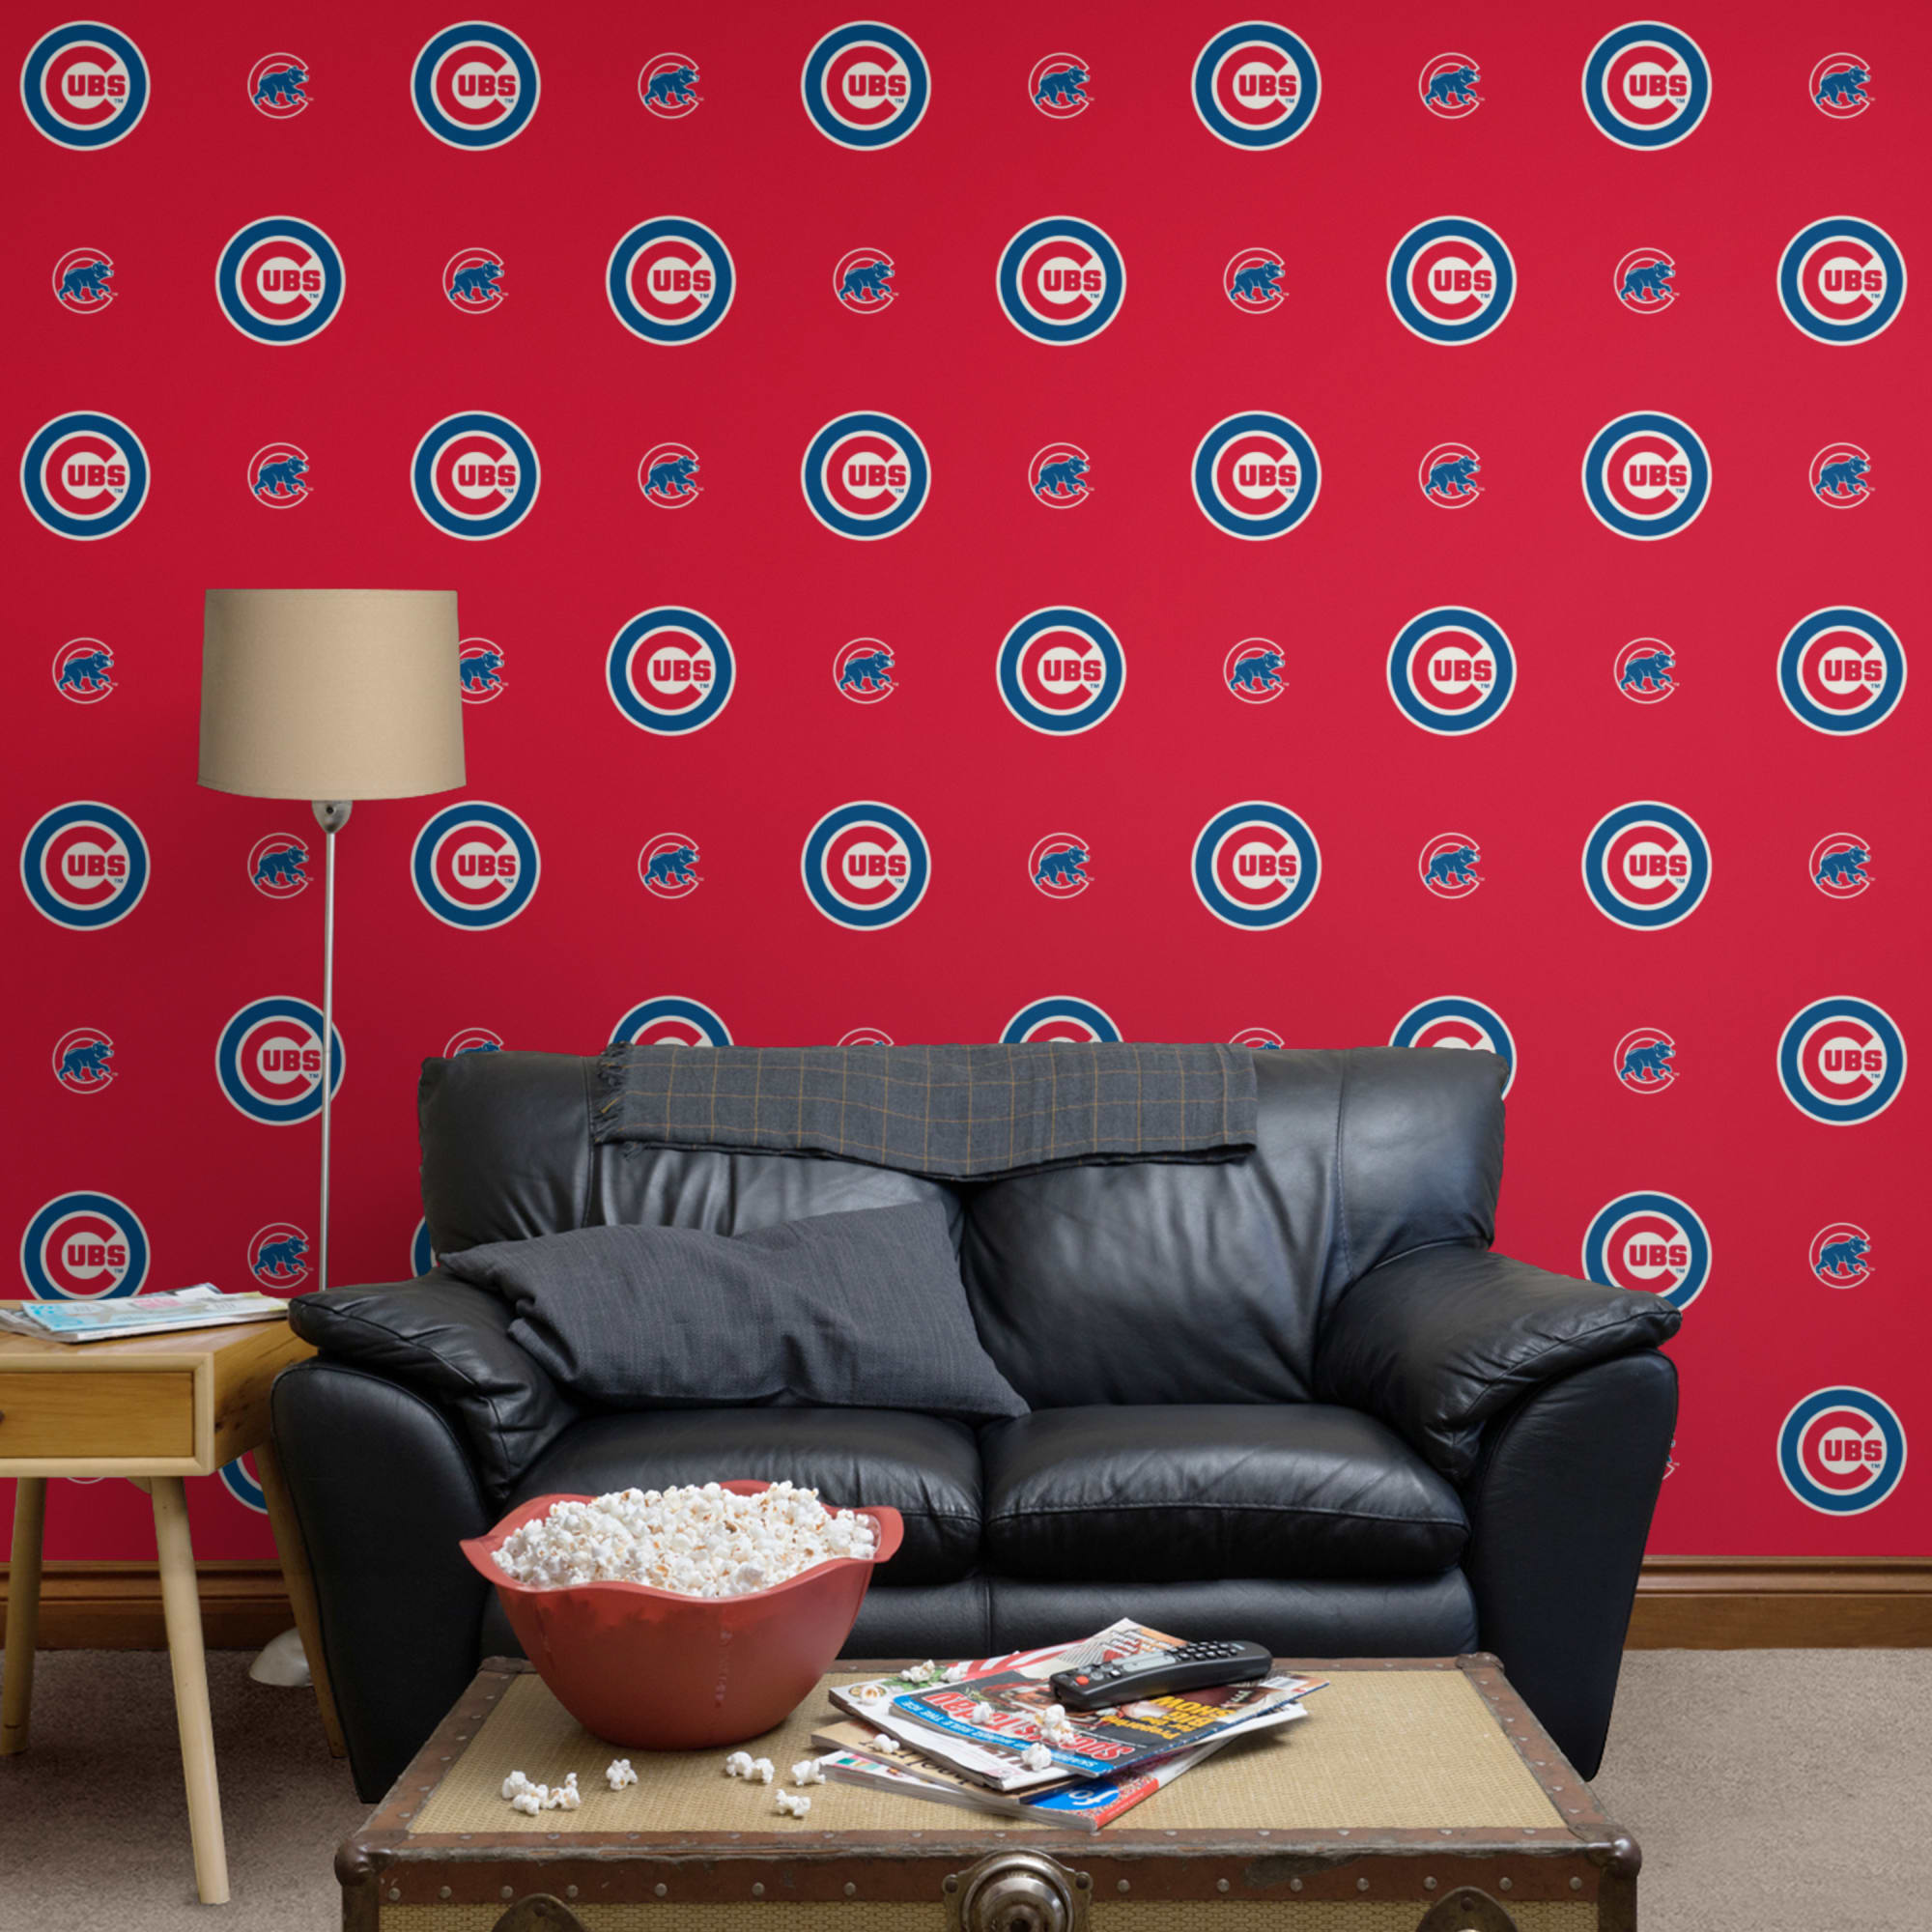 Chicago Cubs: Logo Pattern - Officially Licensed Removable Wallpaper 12" x 12" Sample by Fathead | 100% Vinyl